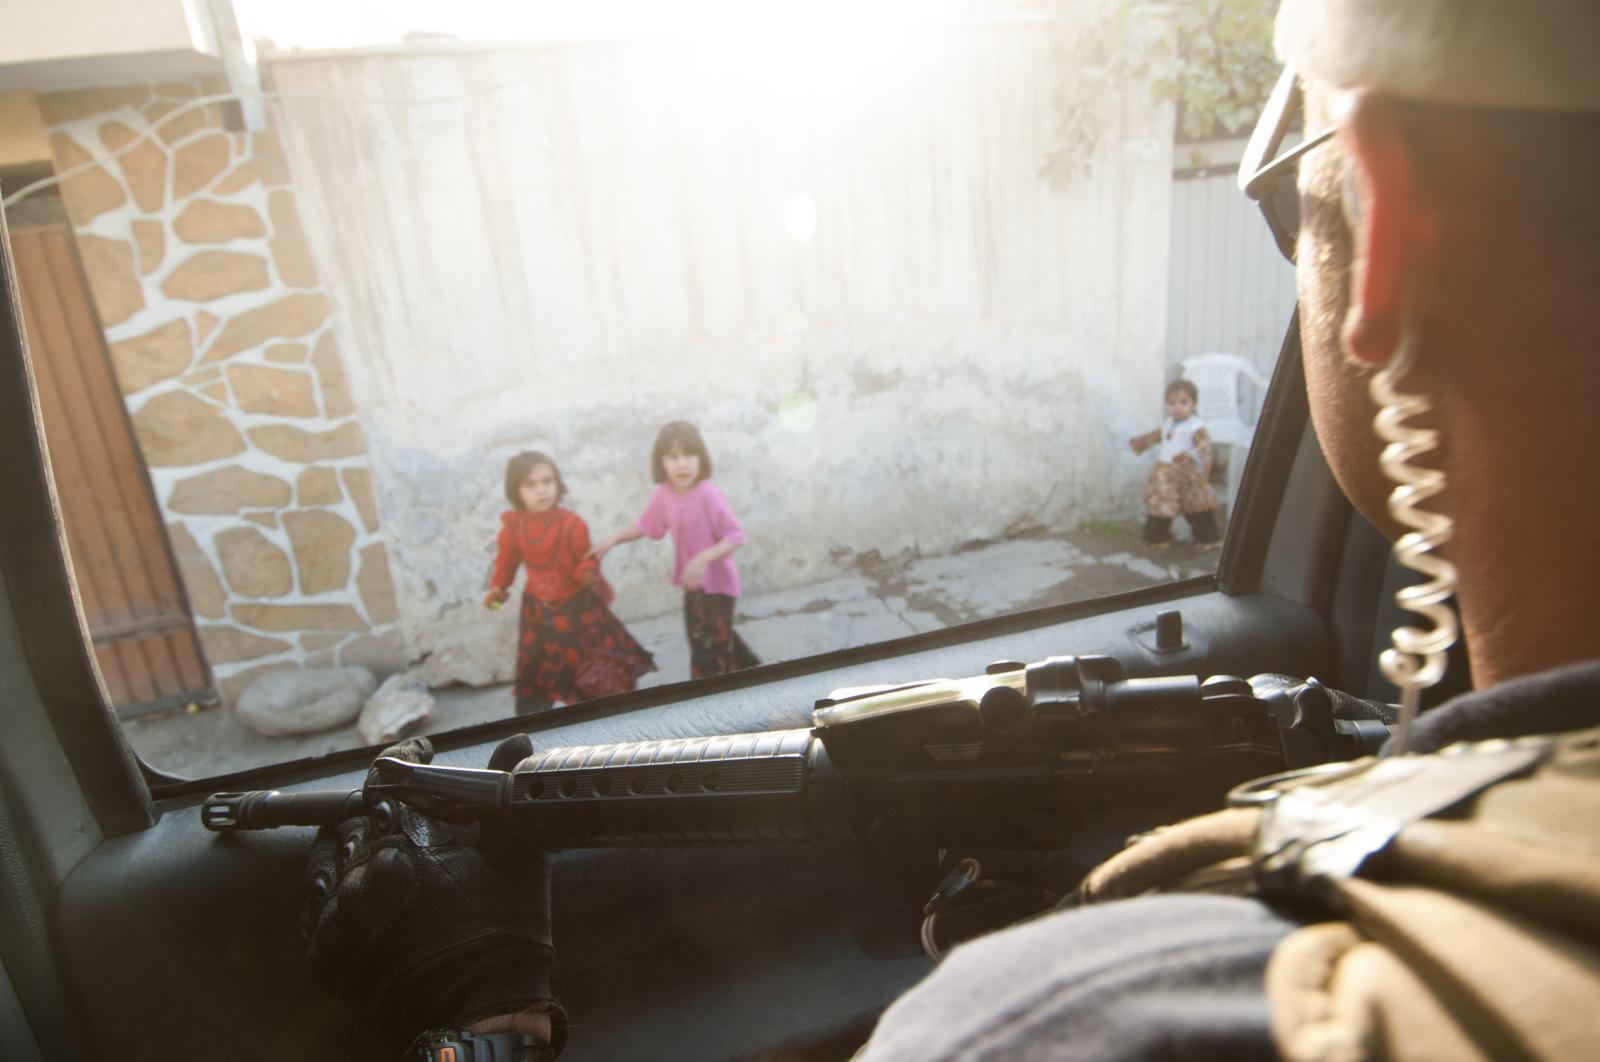 Young Afghan children look on a... oversight from any government.